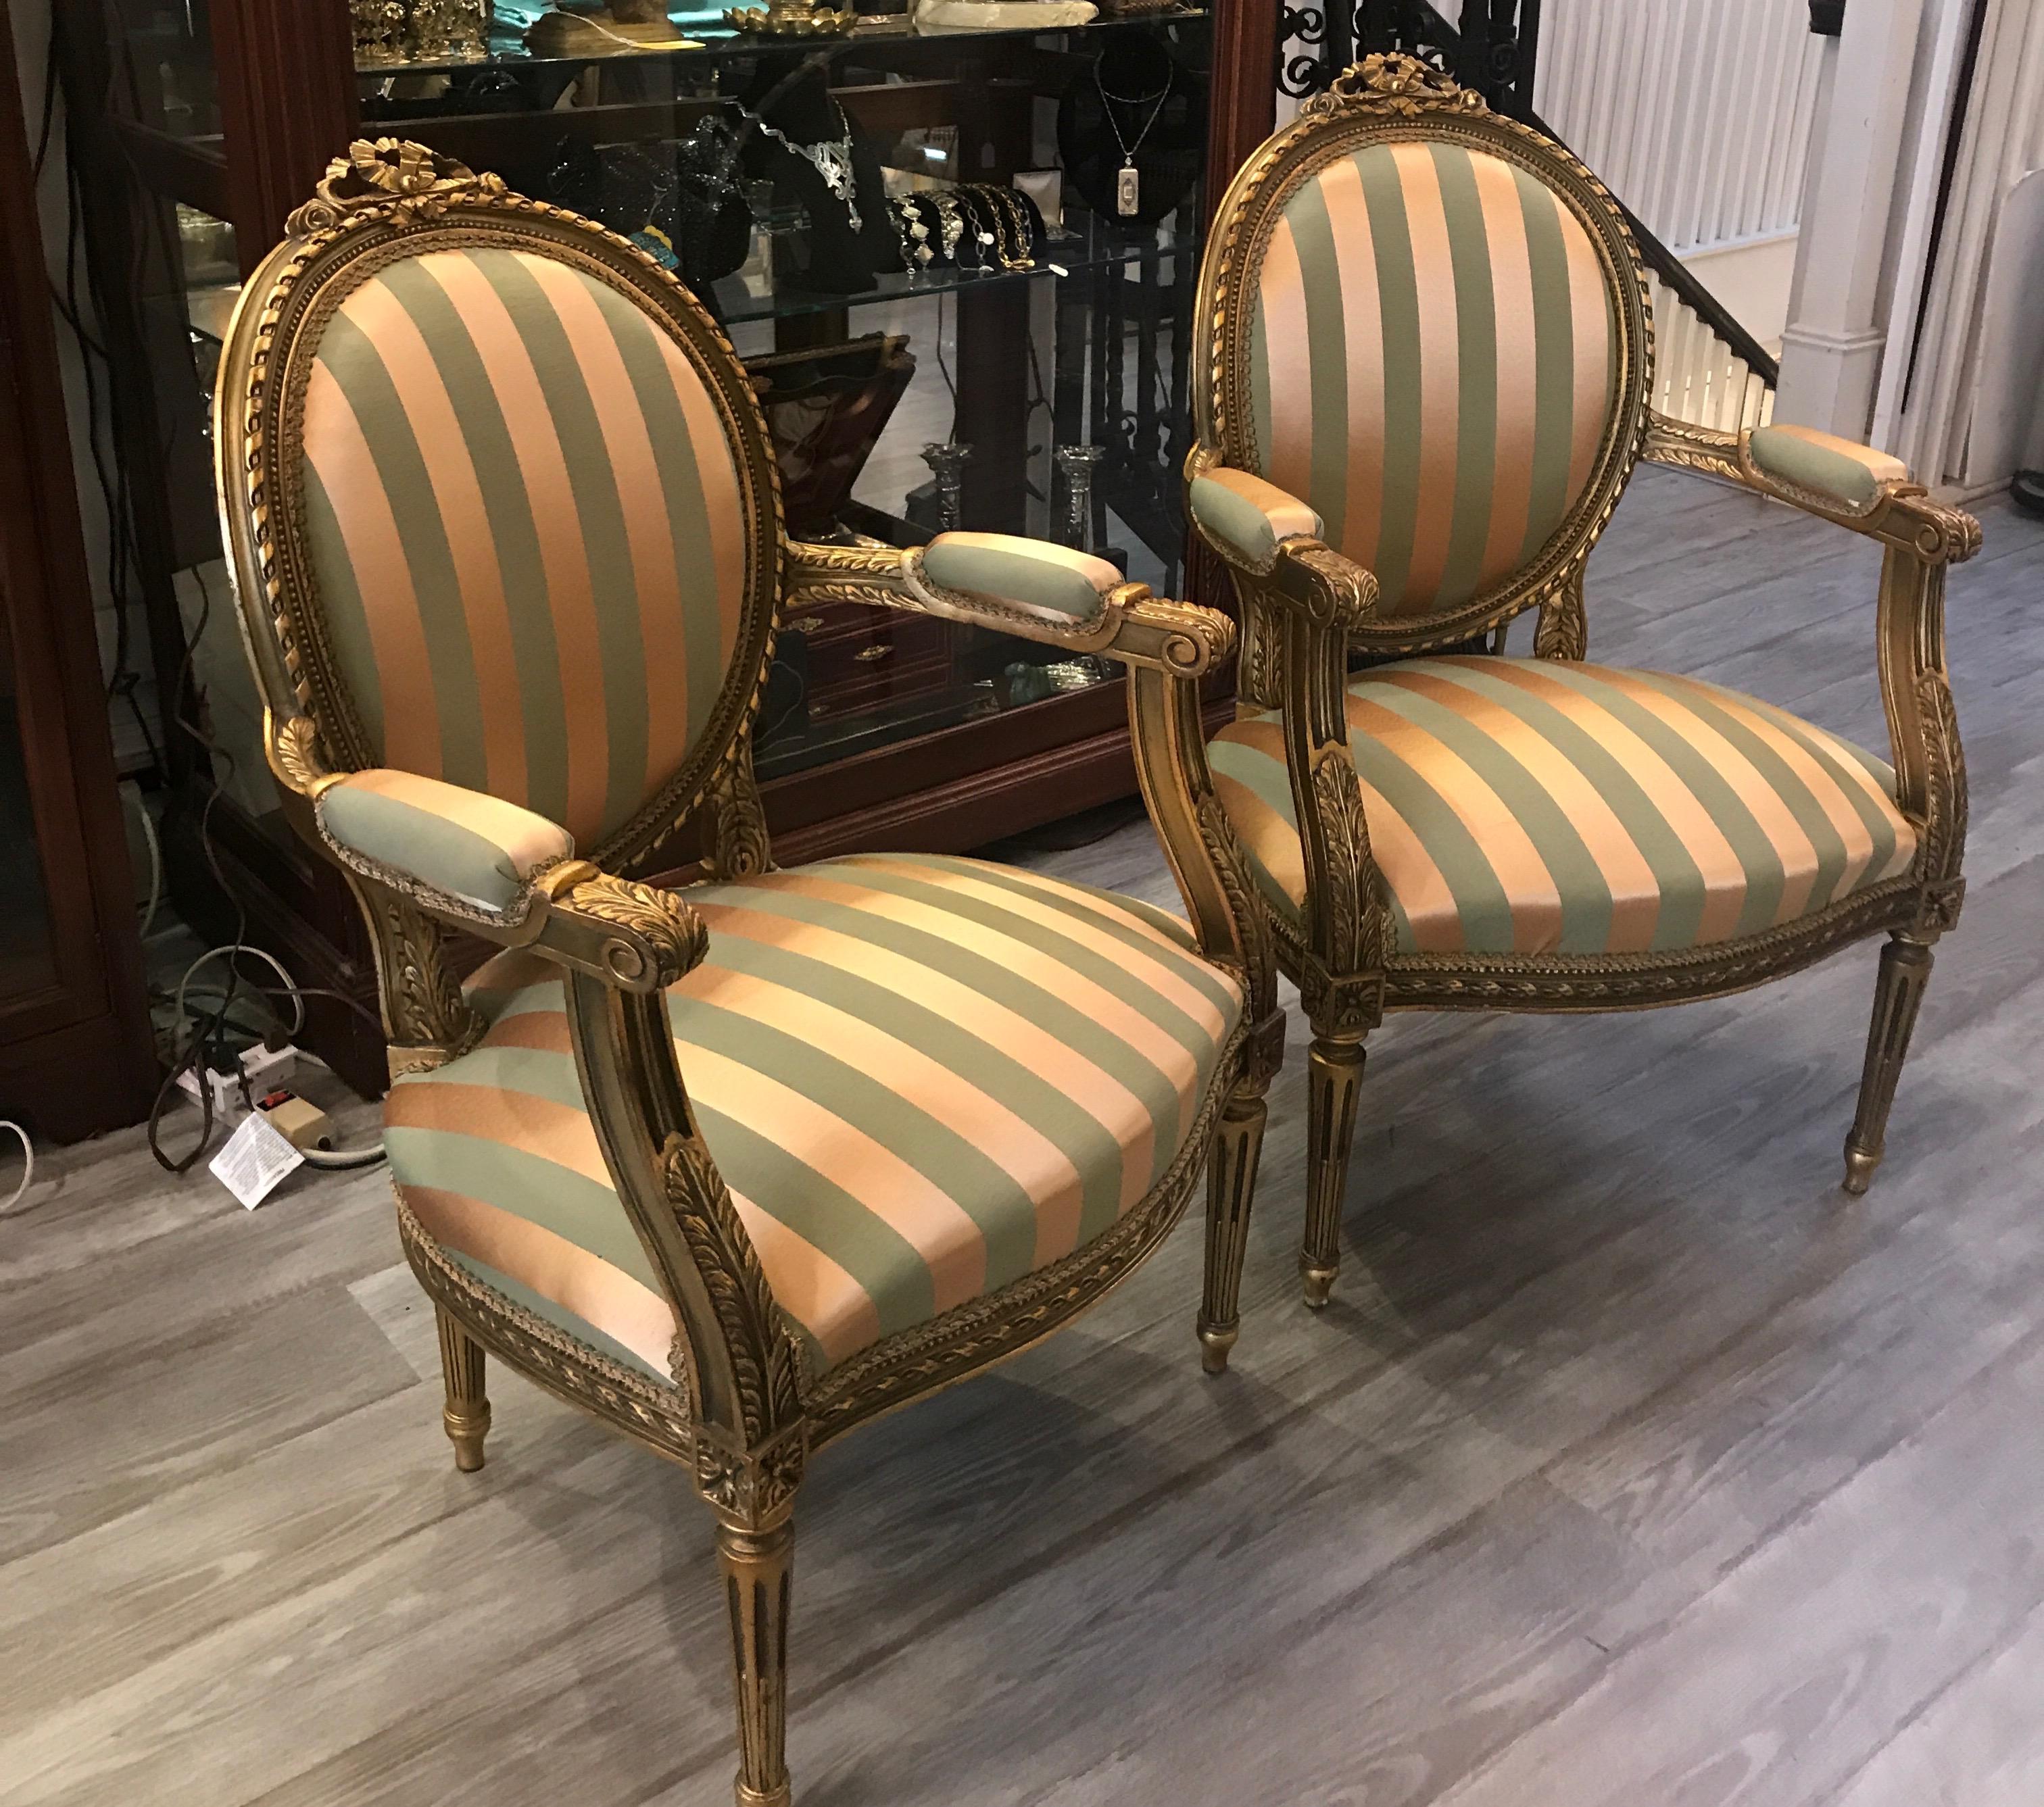 A pair of Louis XVI style giltwood armchairs. The oval backs with attached arms resting on four reeded and tapering legs. The new fabric in a gold and sage damask satin stripe, mid-20th century.